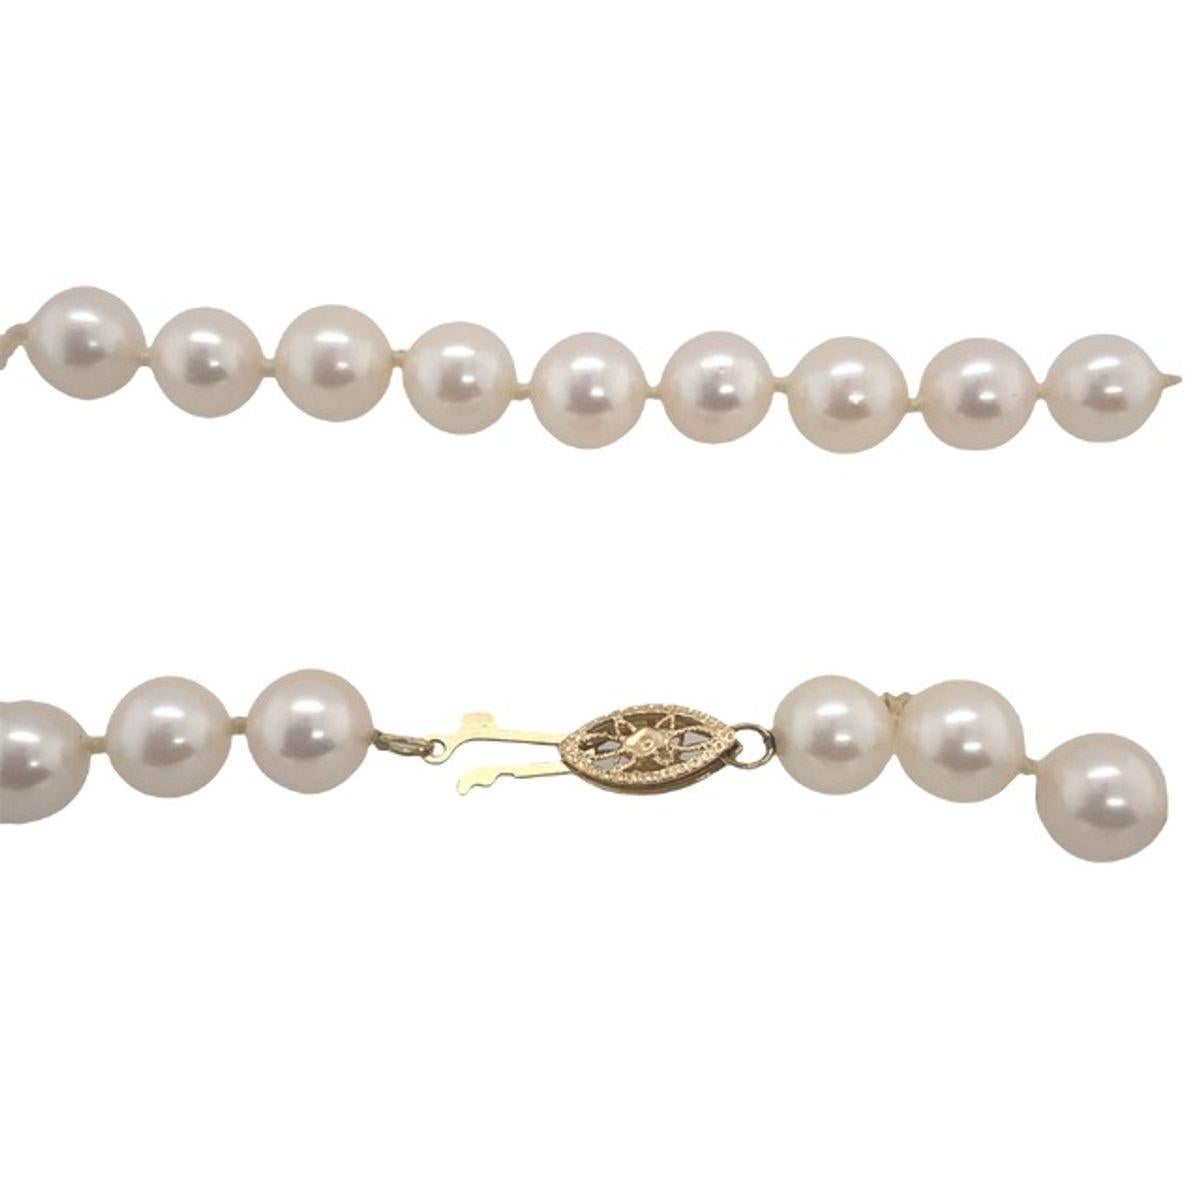 Perfectly matched all individually knotted.

Additional Information:
Total Weight: 30g
Necklace Length: 18 inches
Clasp: 14ct Yellow Gold
SMS3808  